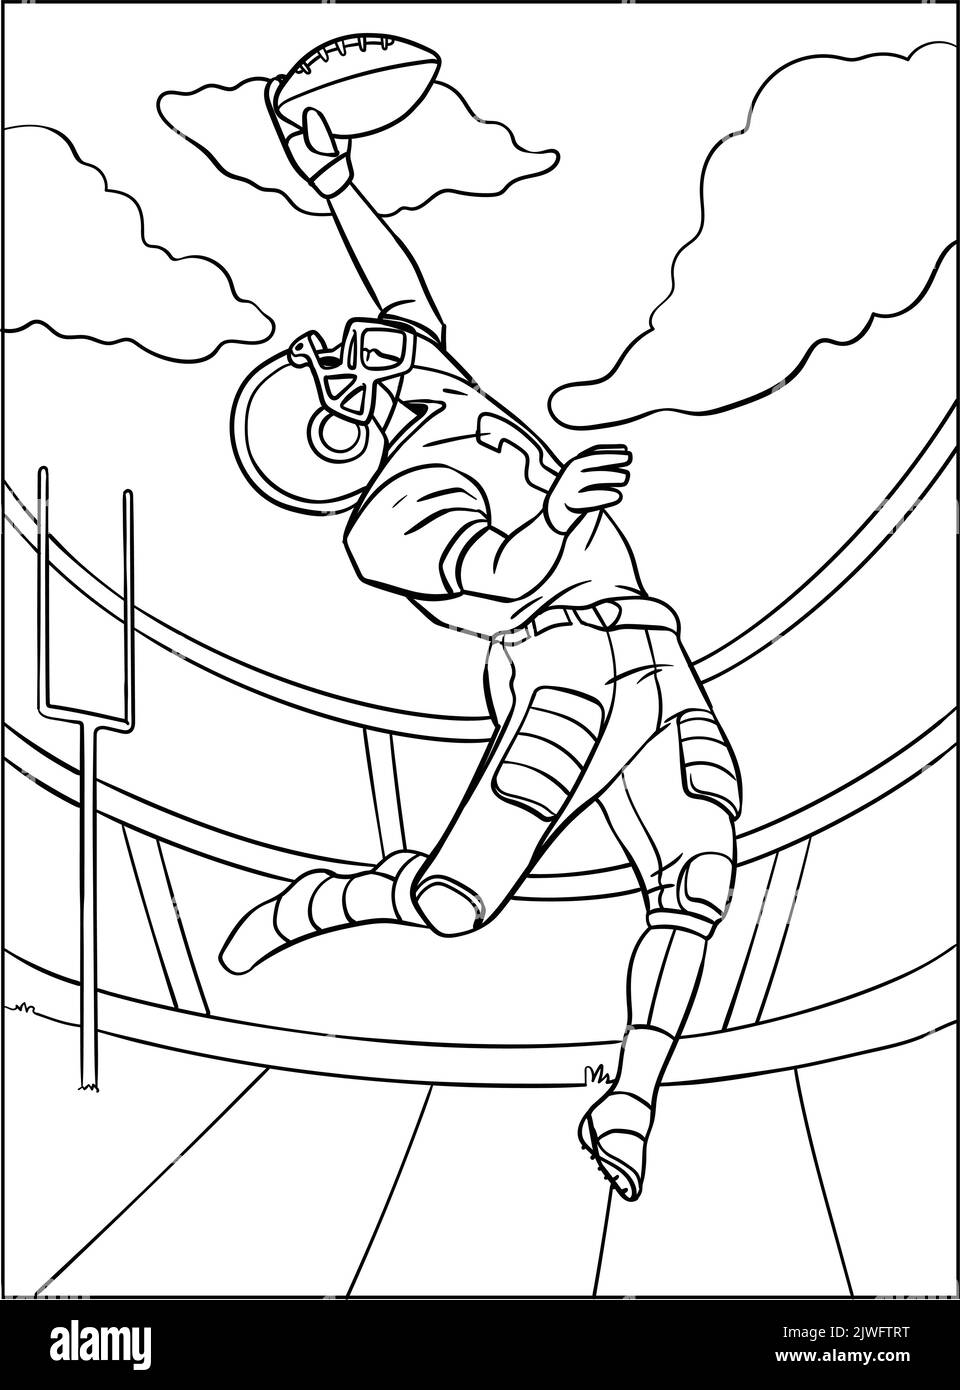 American Football Coloring Page for Kids Stock Vector